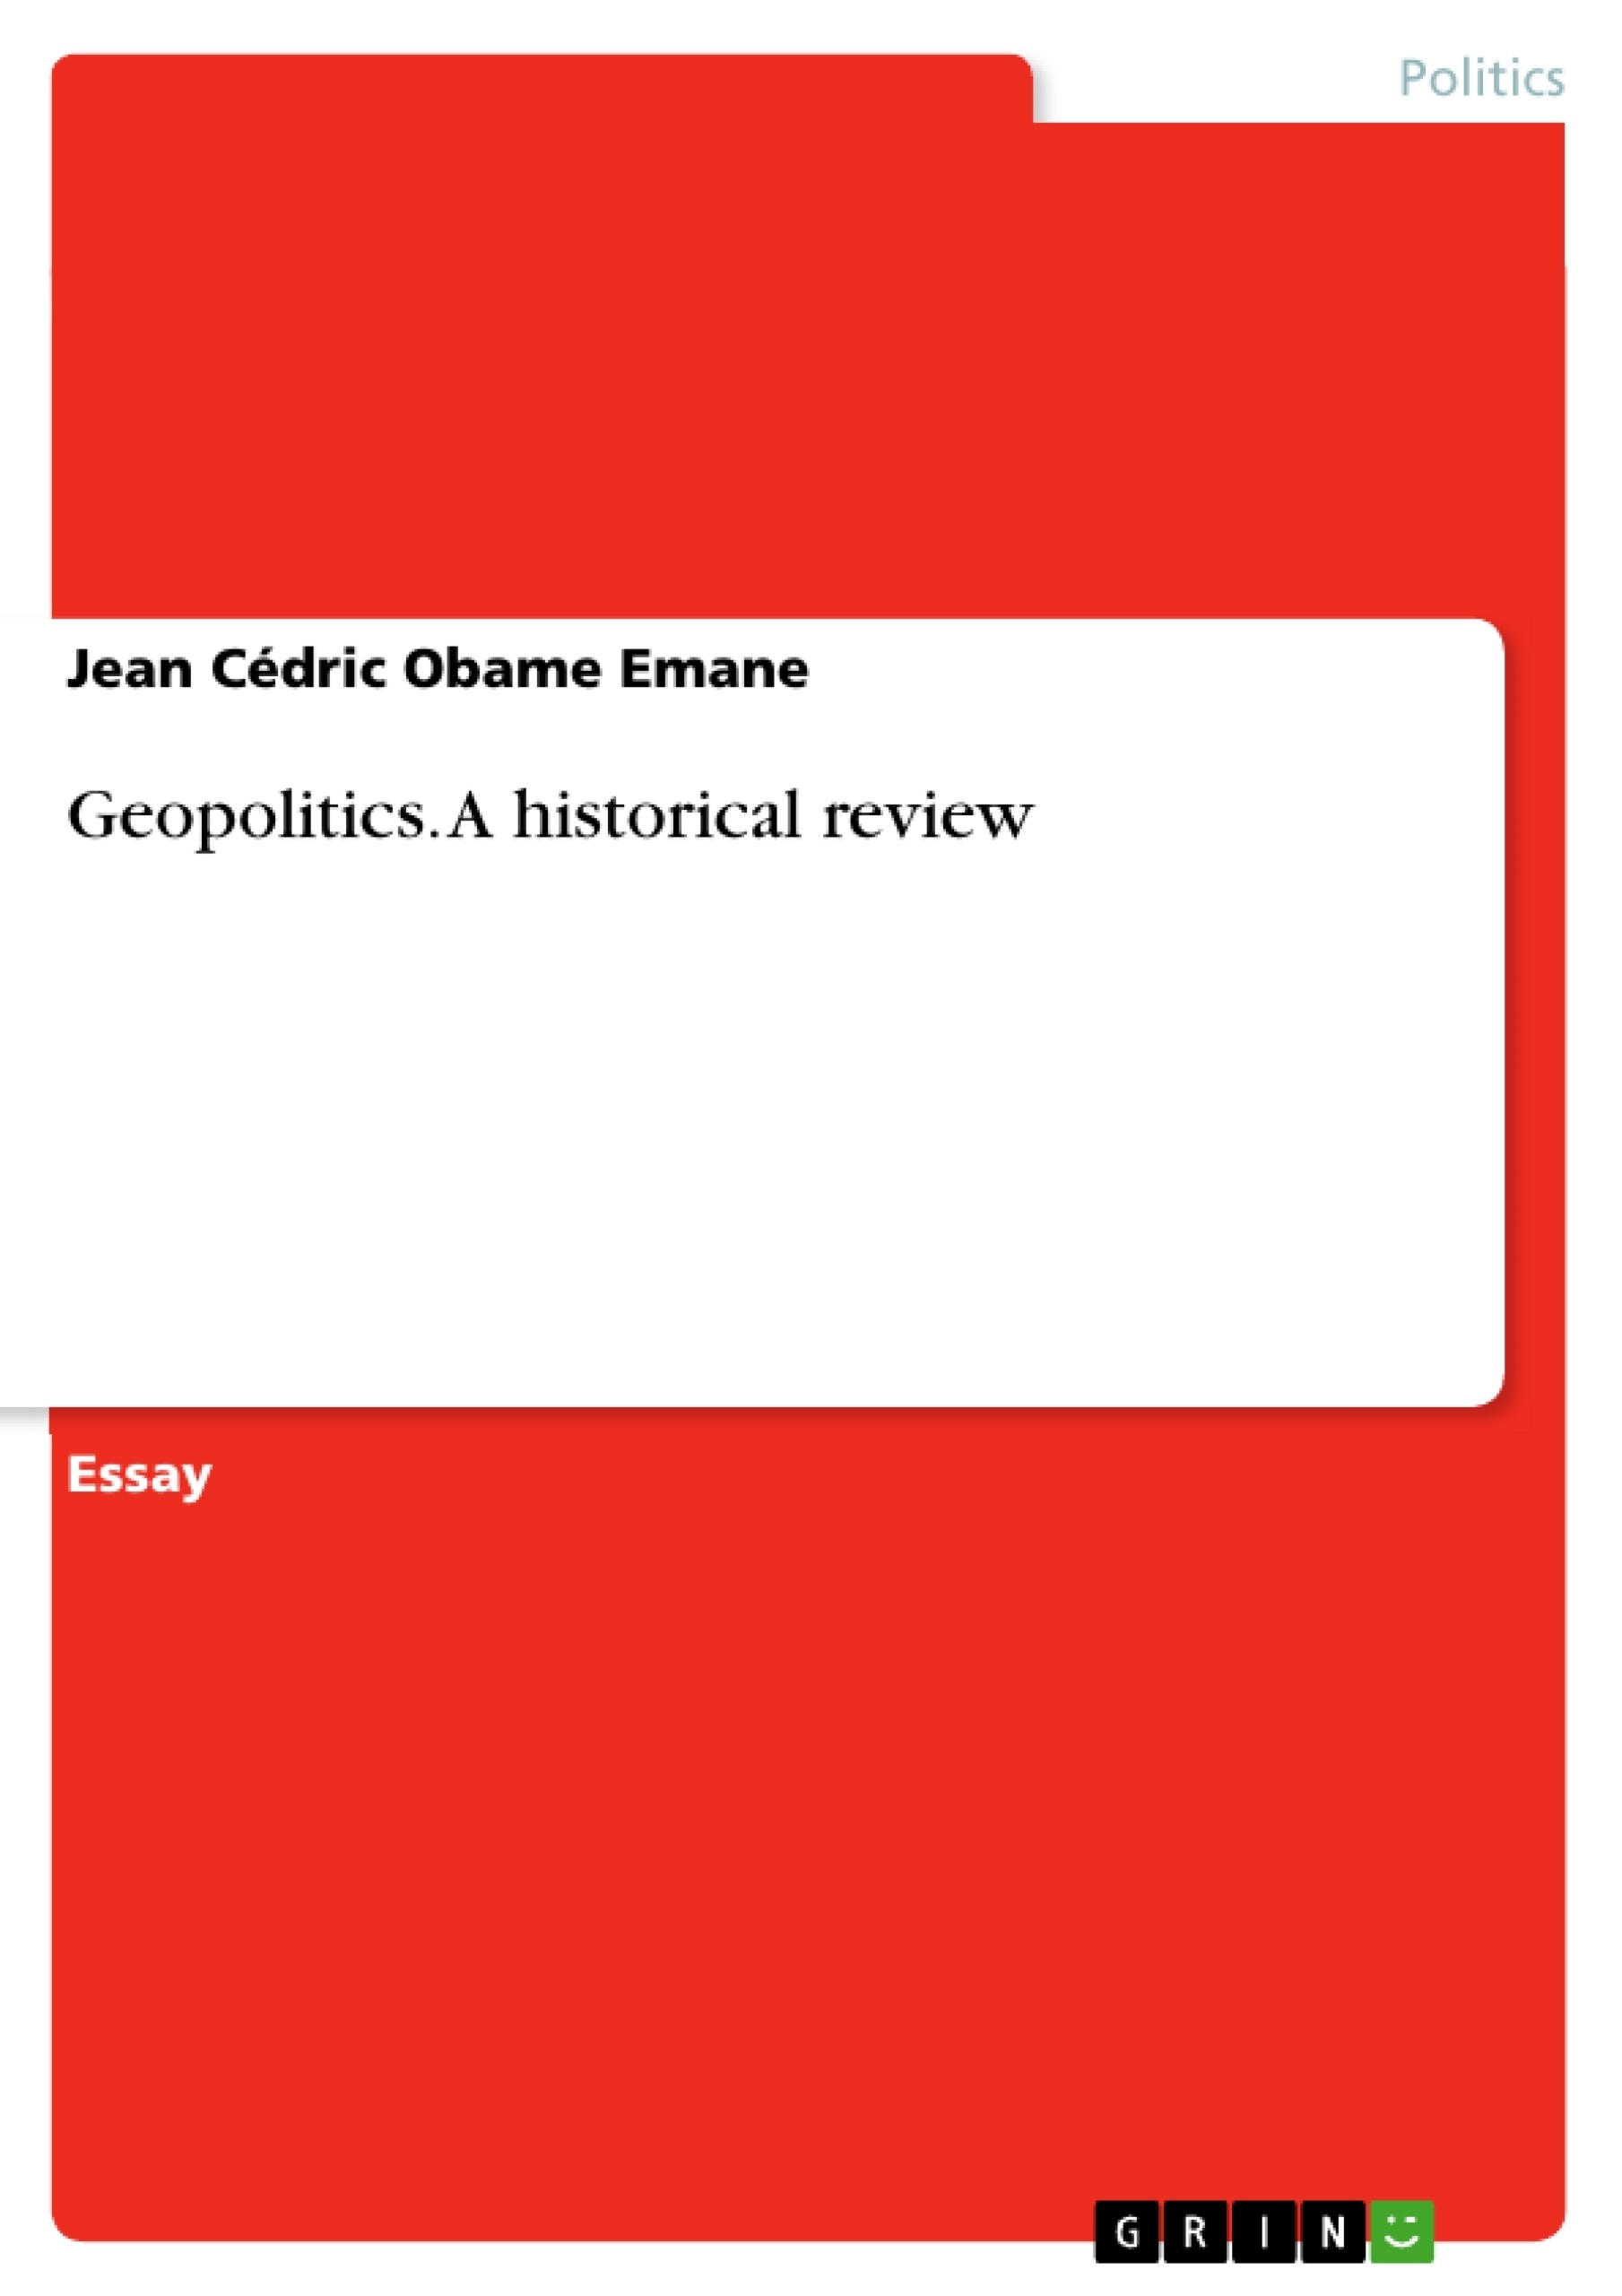 Title: Geopolitics. A historical review